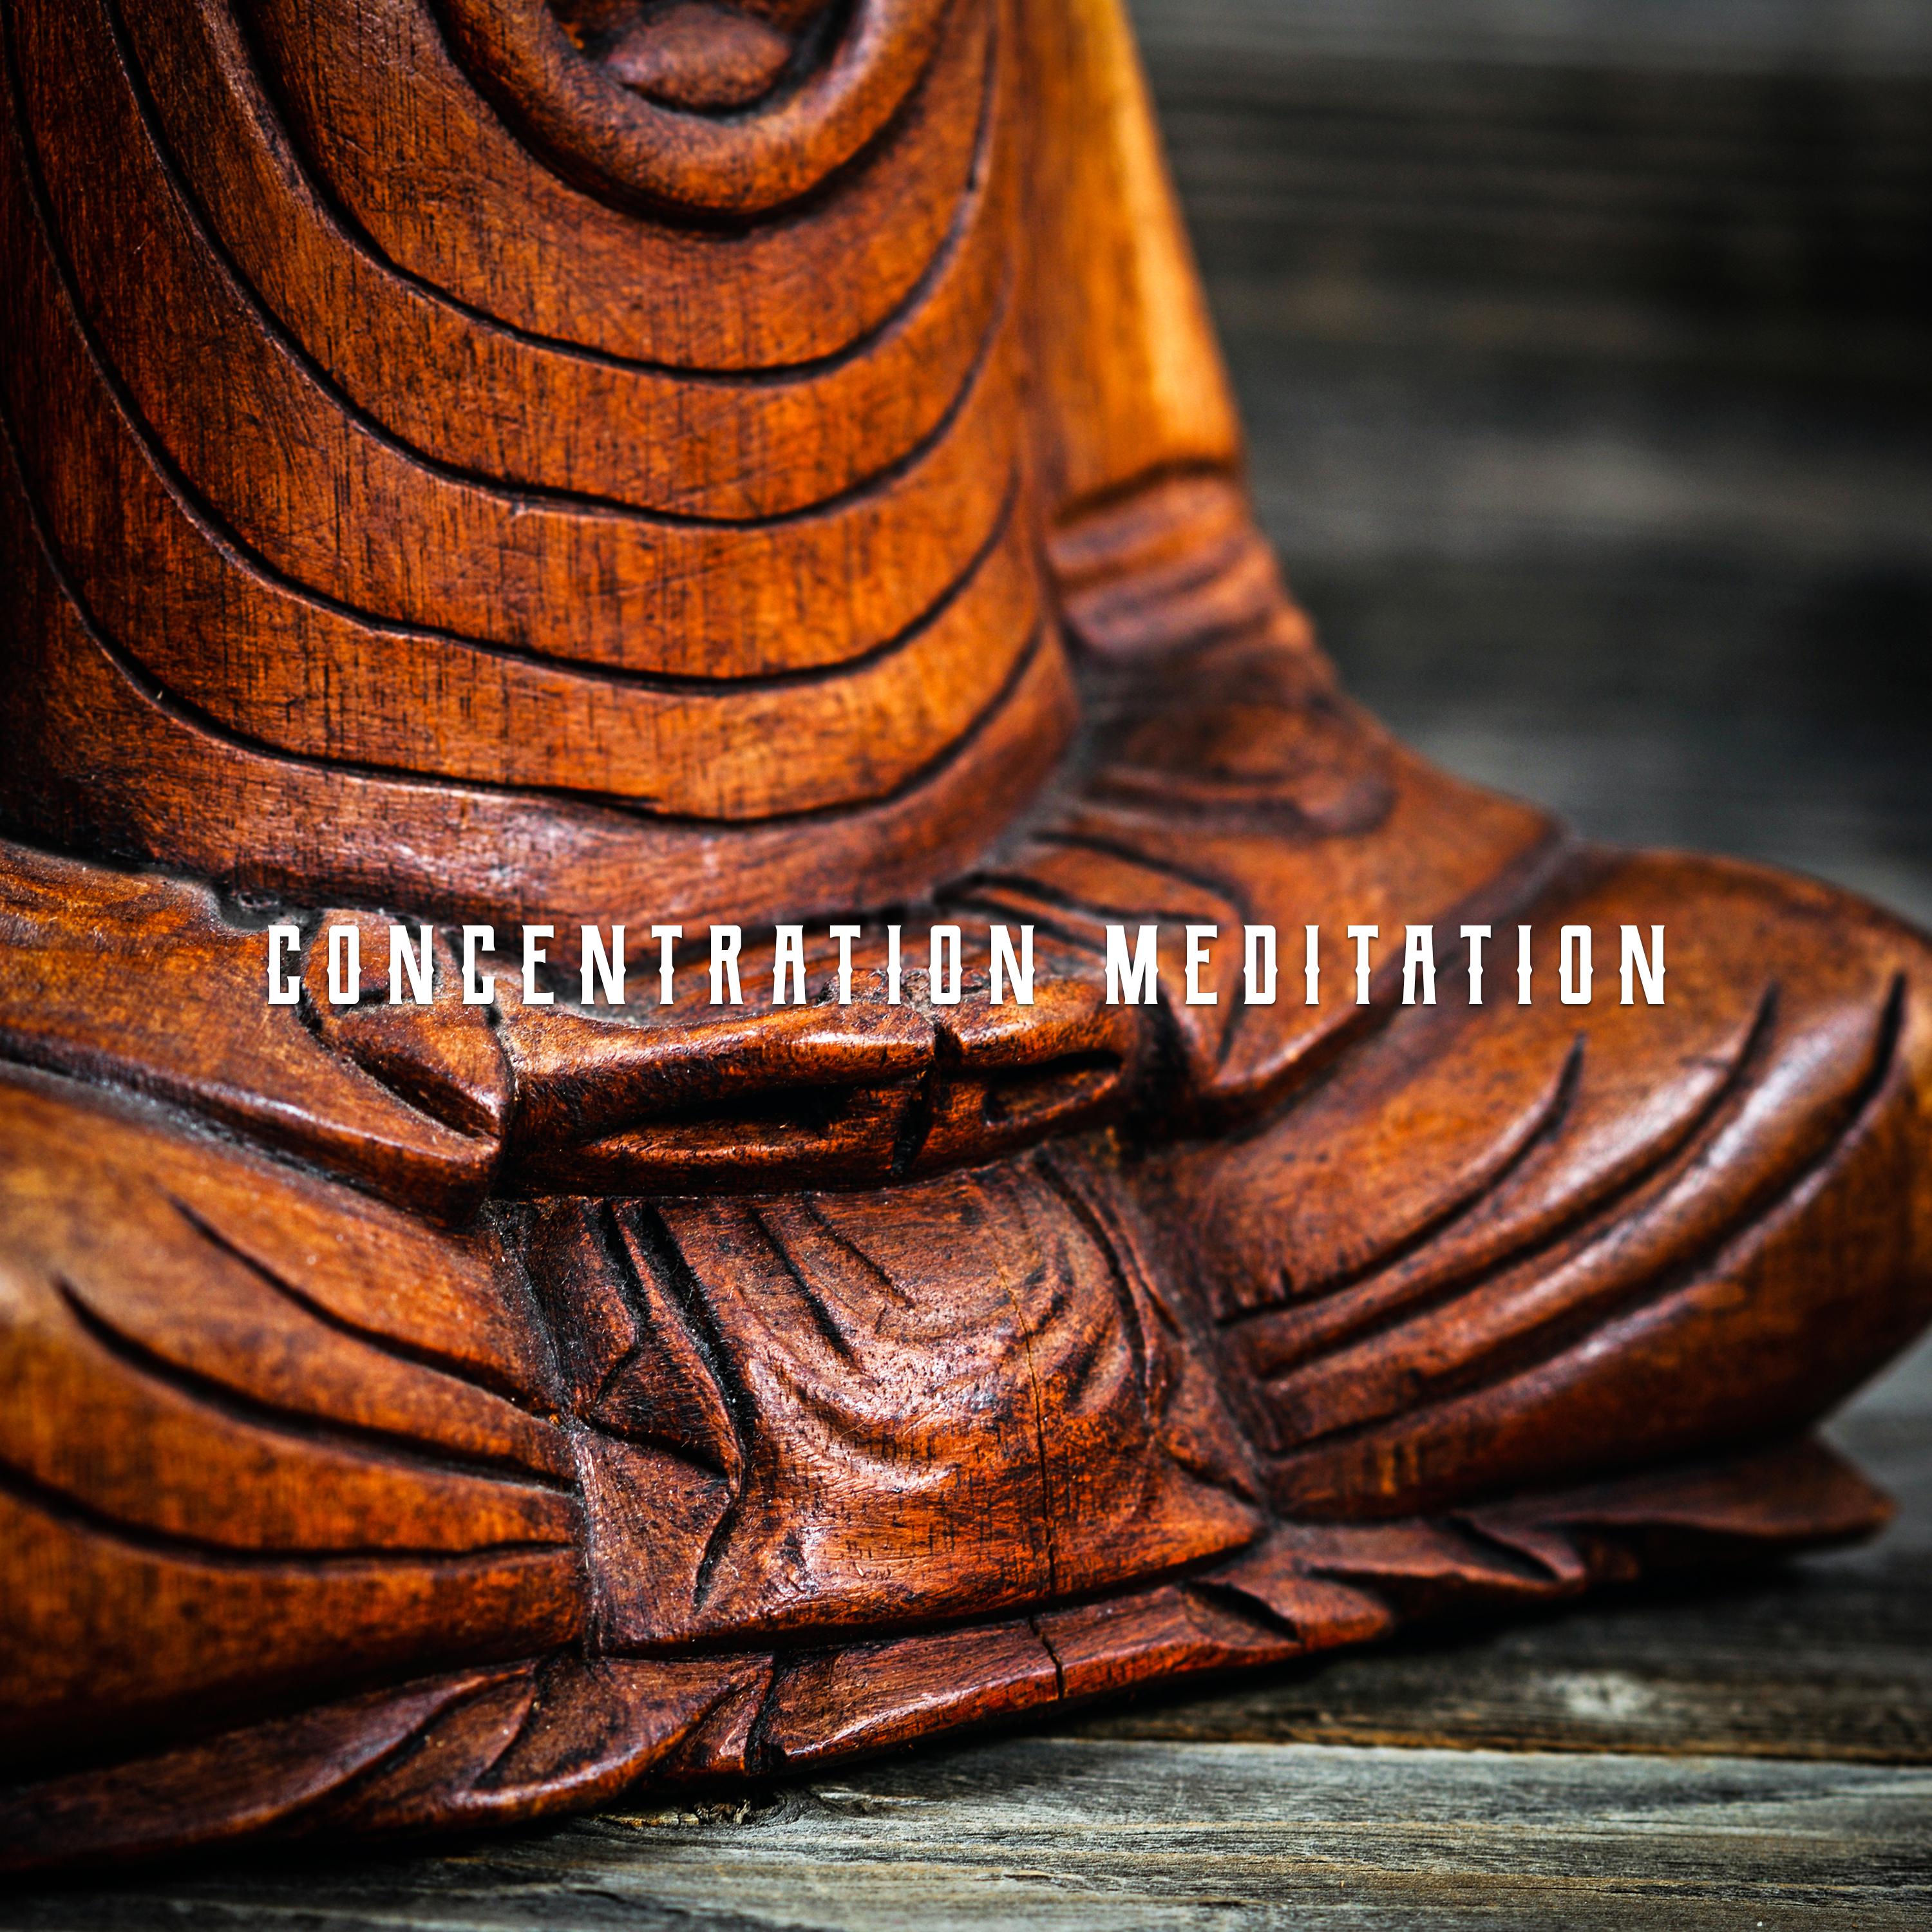 Concentration Meditation (Refocus Your Awareness, Improve Ability to Concentrate)